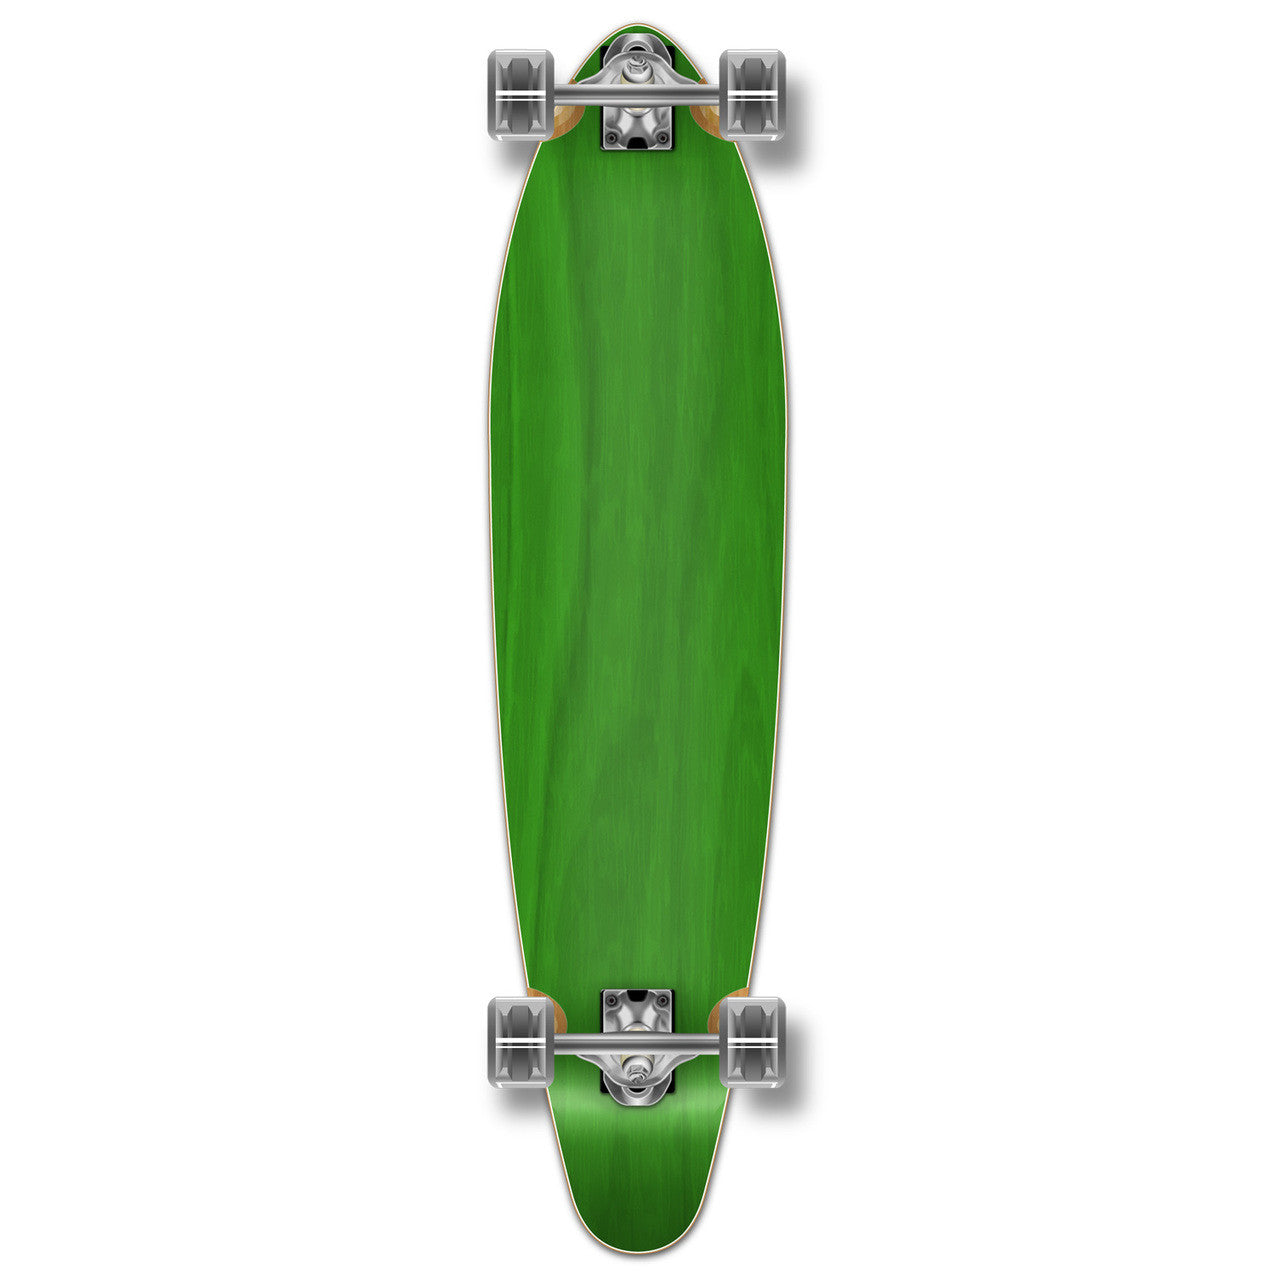 Yocaher Kicktail Longboard Complete - Stained Green